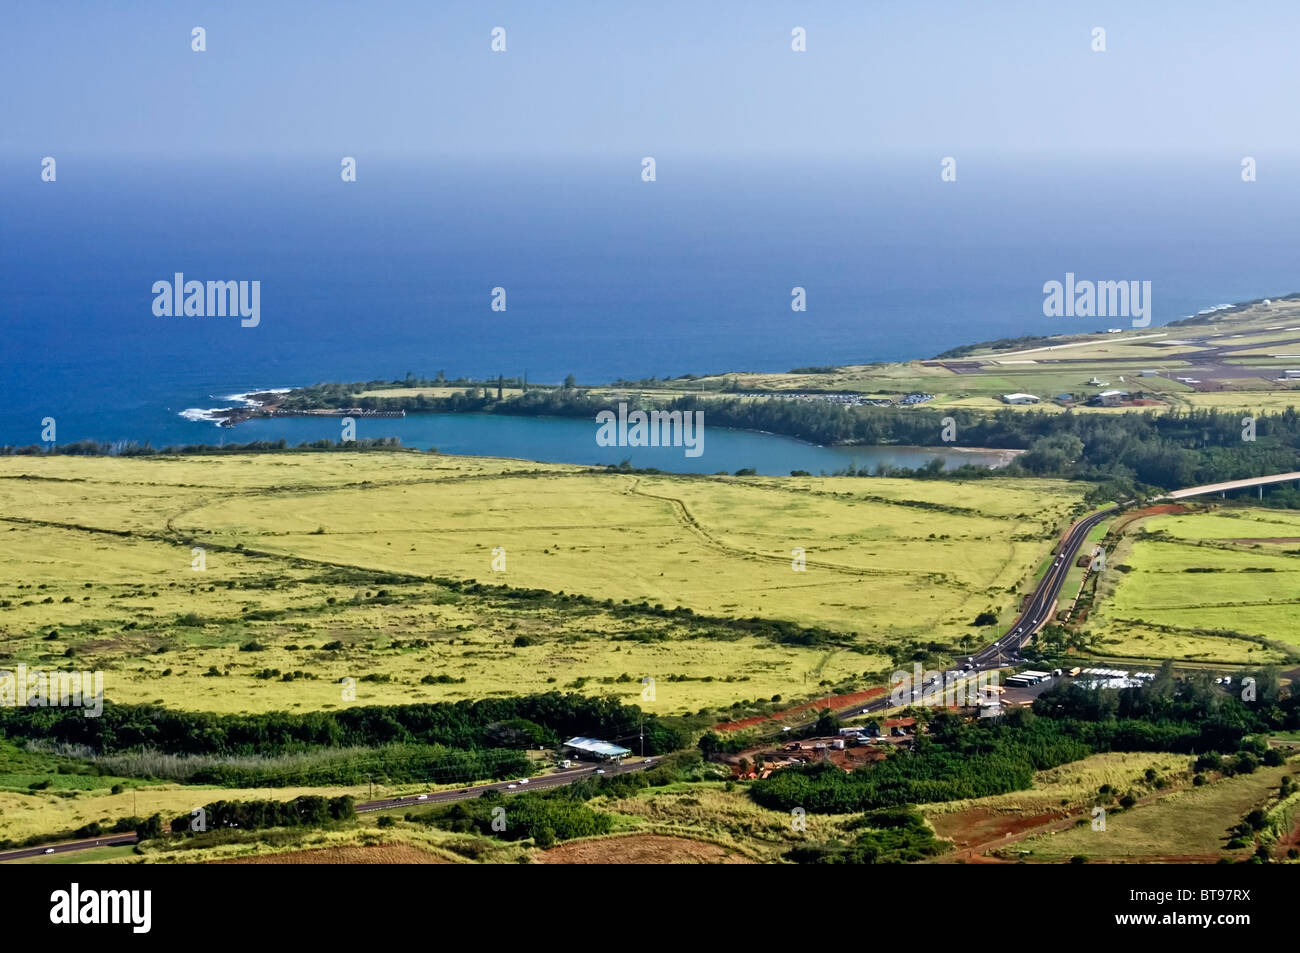 Aerial view of Hawaii's island of Kauai, featuring highway 56 and the Lihue Airport Stock Photo